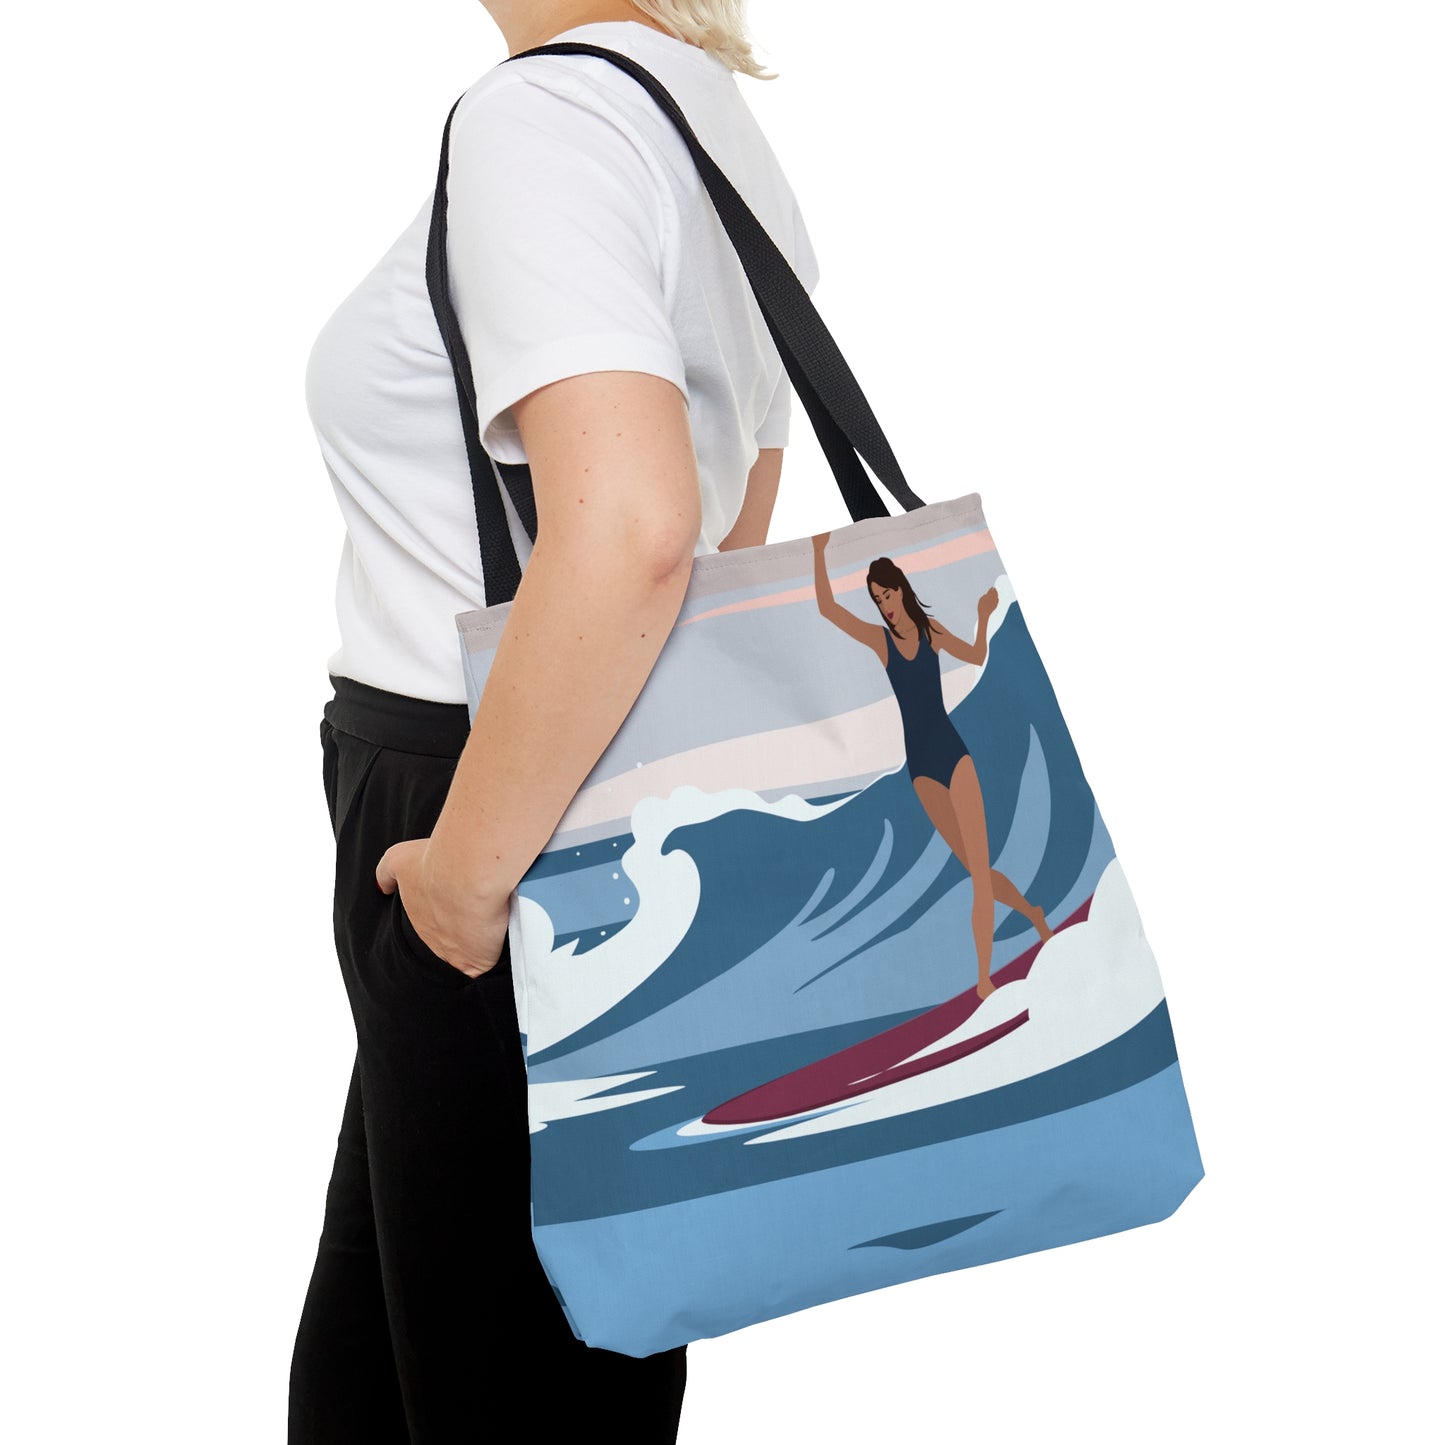 Serenity by the Sea Woman Surfing Art AOP Tote Bag